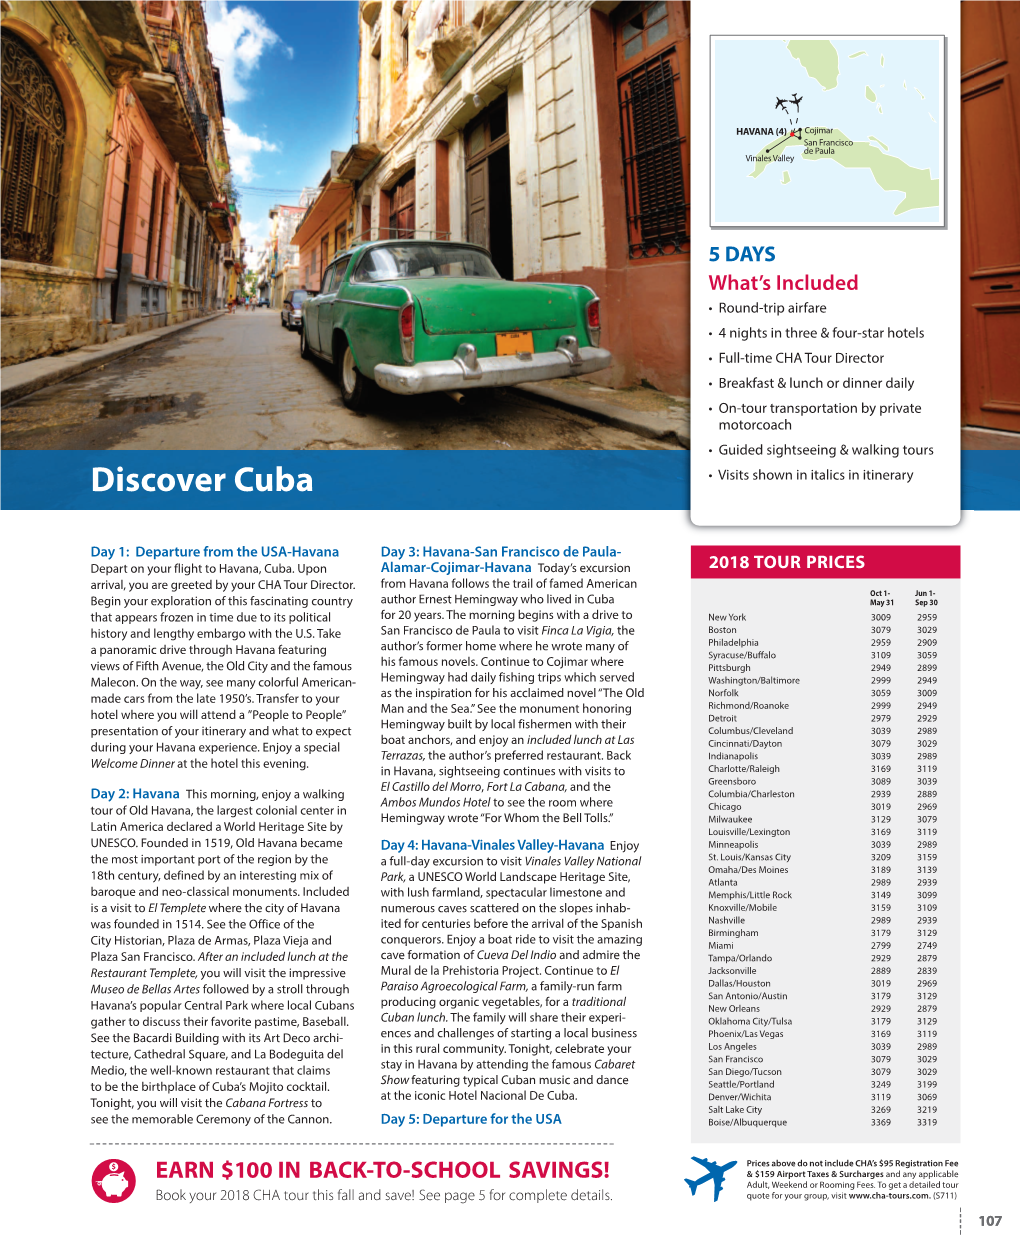 Discover Cuba • Visits Shown in Italics in Itinerary